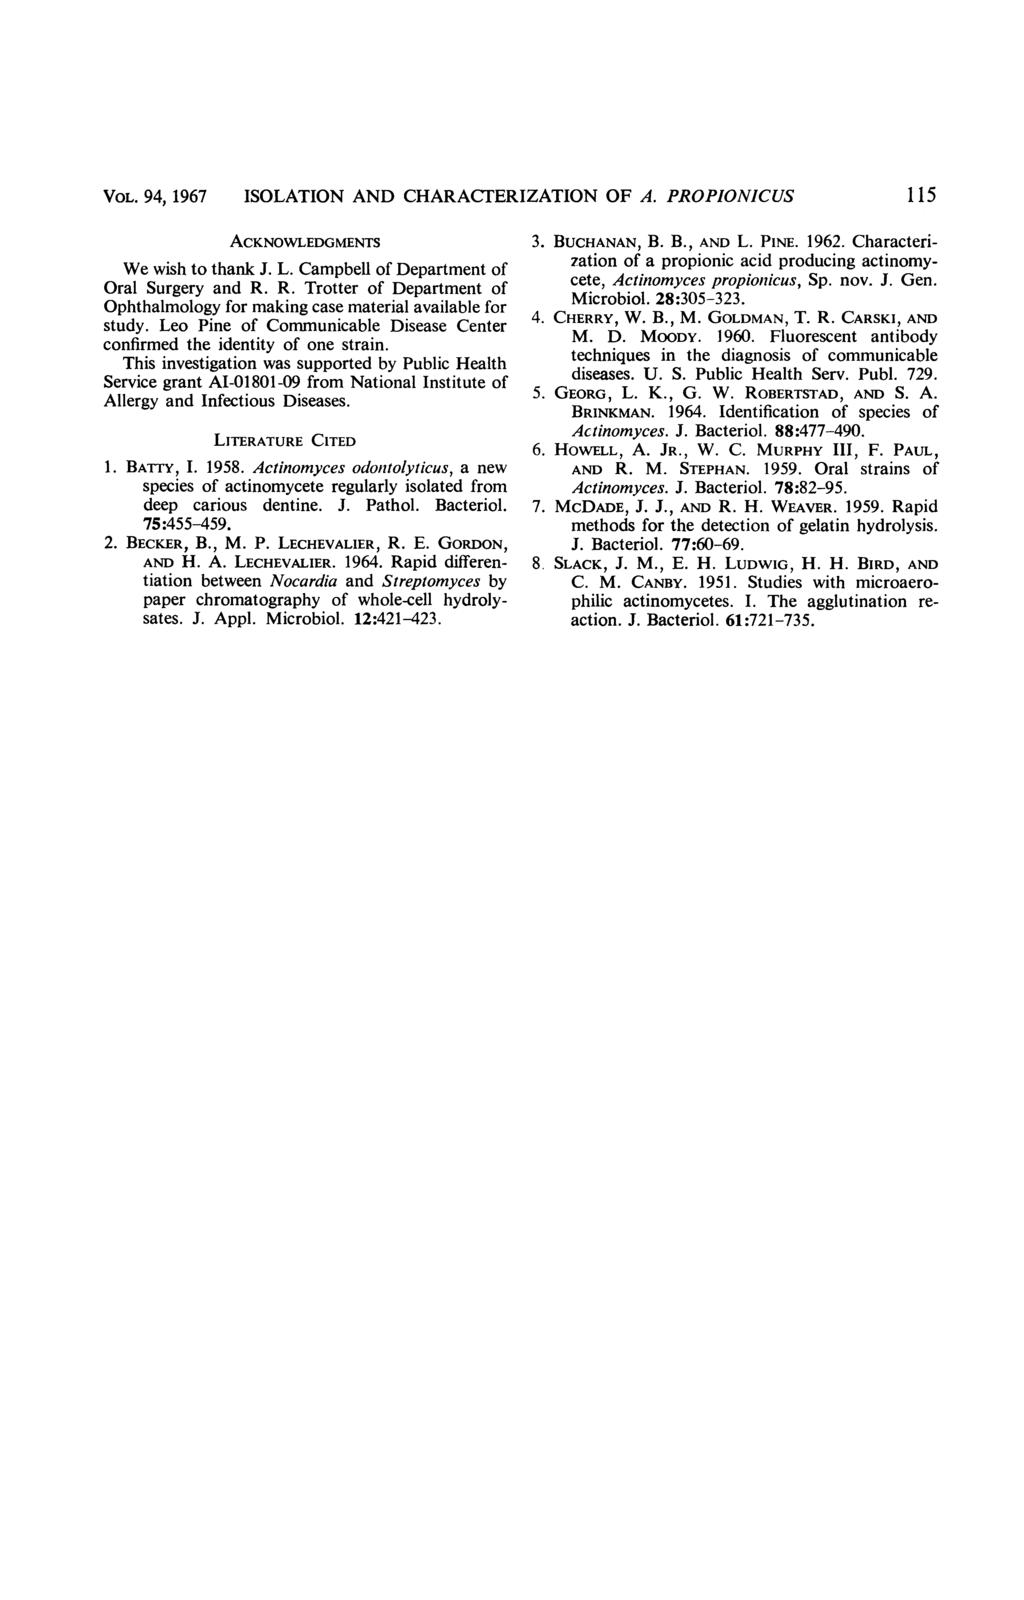 VOL. 94, 1967 ISOLATION AND CHARACTERIZATION OF A. PROPIONICUS 115 ACKNOWLEDGMENTS We wish to thank J. L. Campbell of Department of Oral Surgery and R.